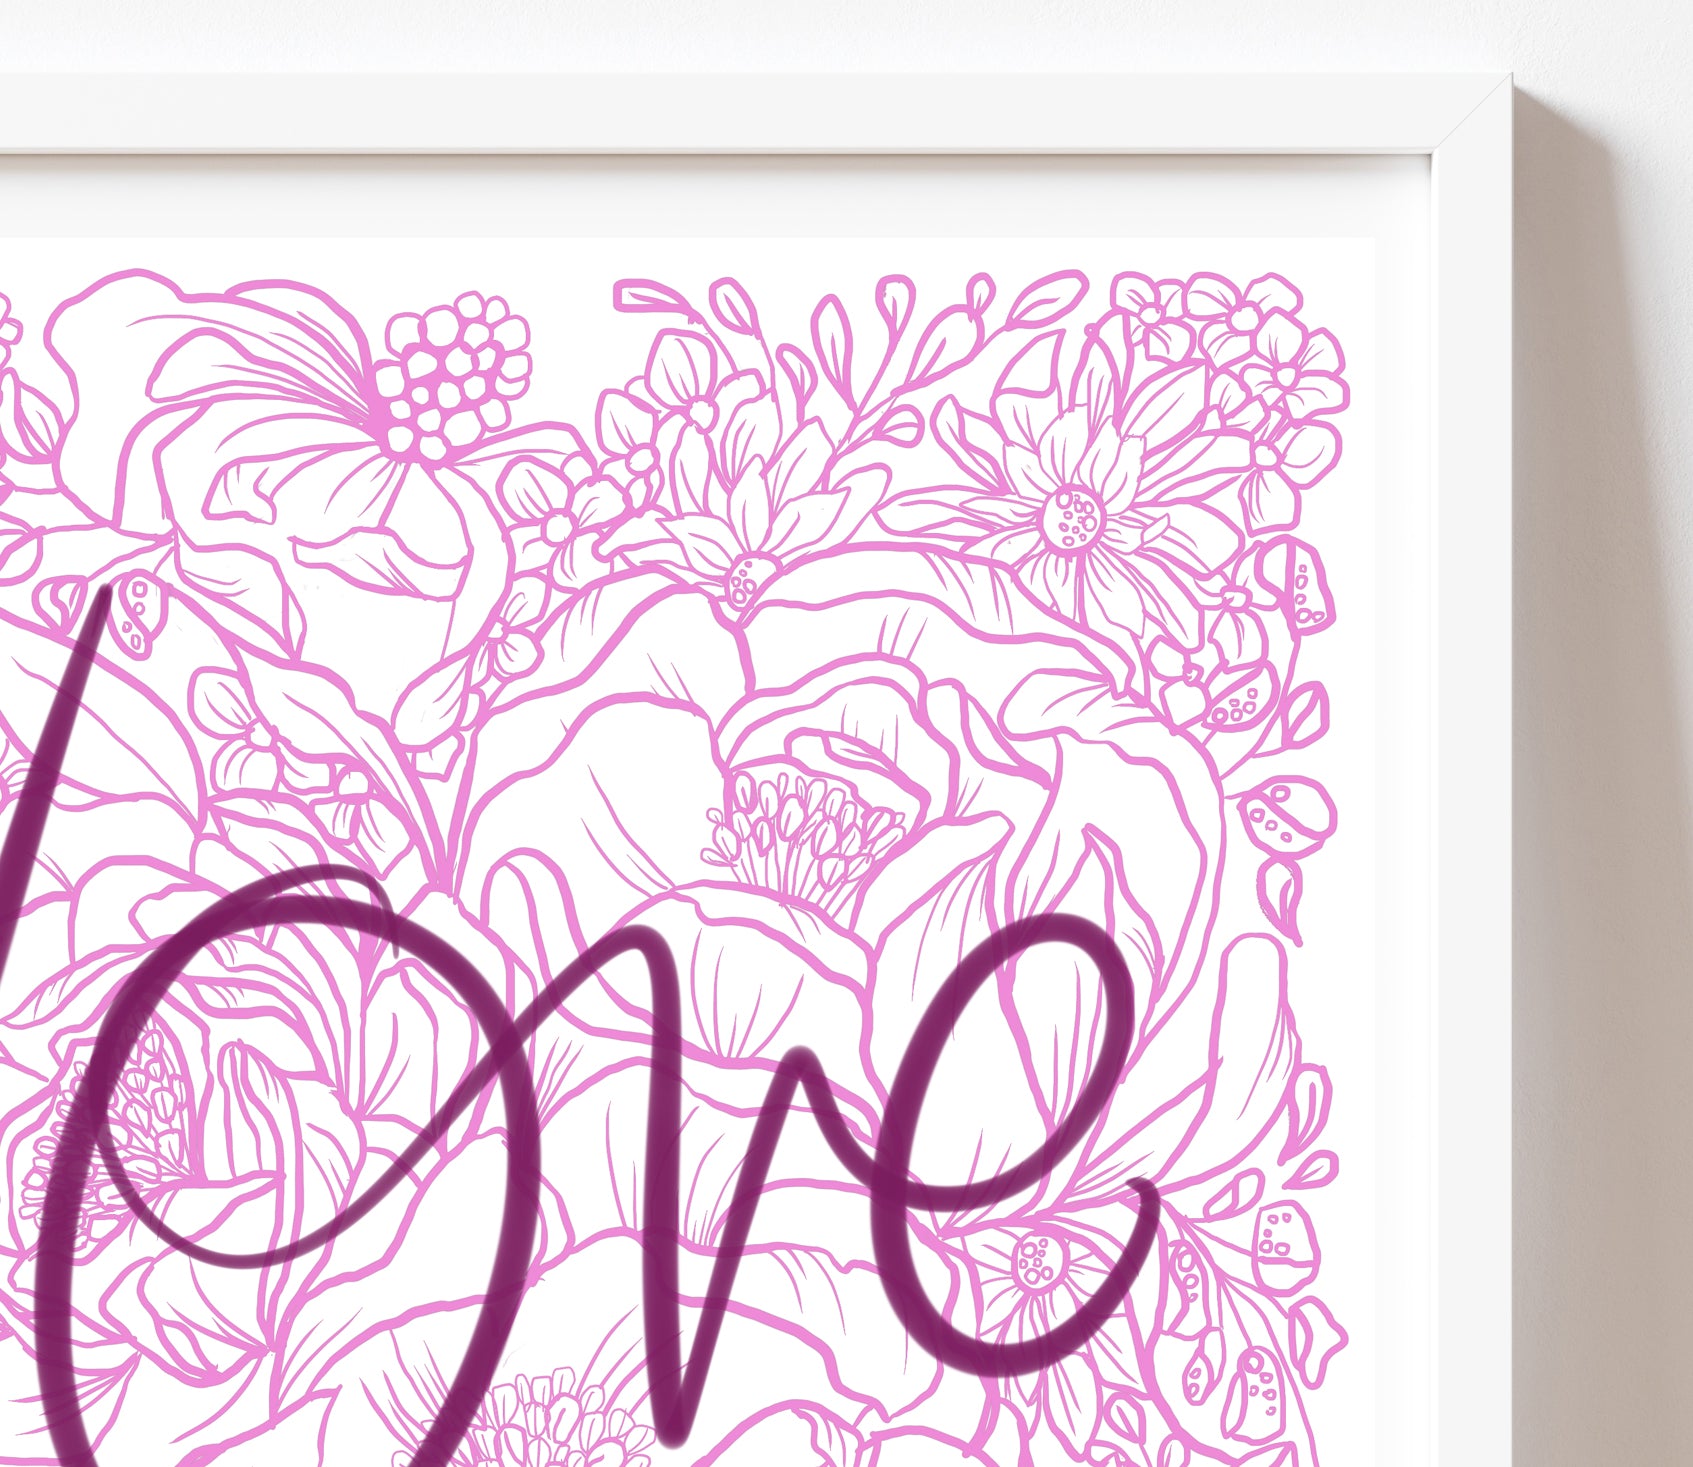 Love you  - Self love - Pink on white - illustrated by hand flowers print